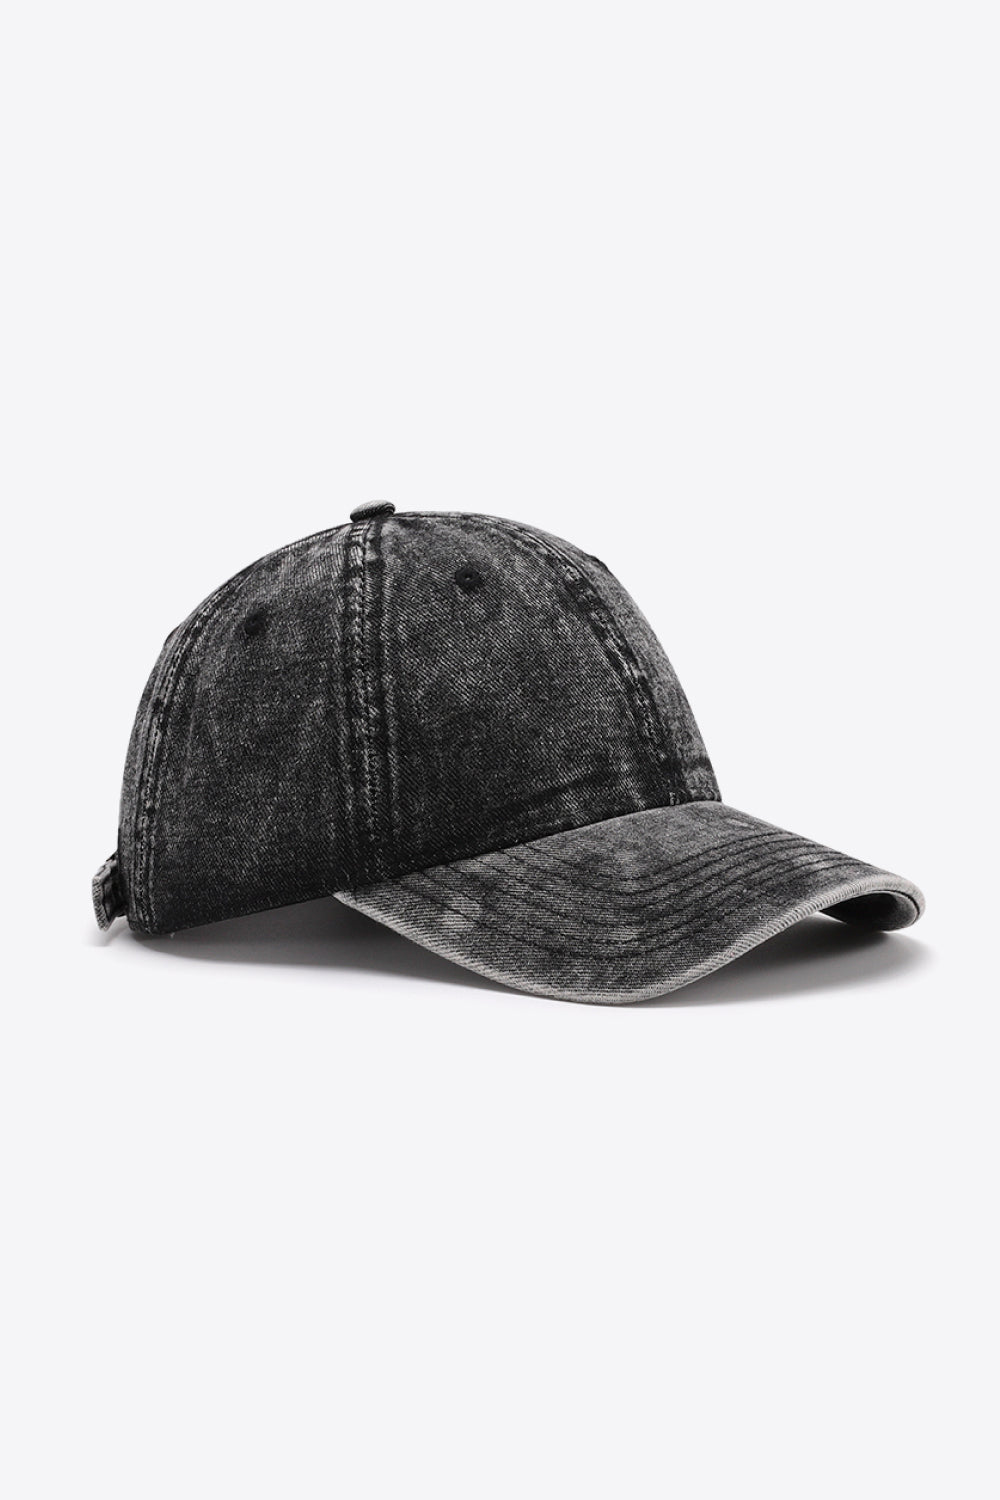 Villa Blvd Washed Baseball Hat ? Multiple Colors Available ?